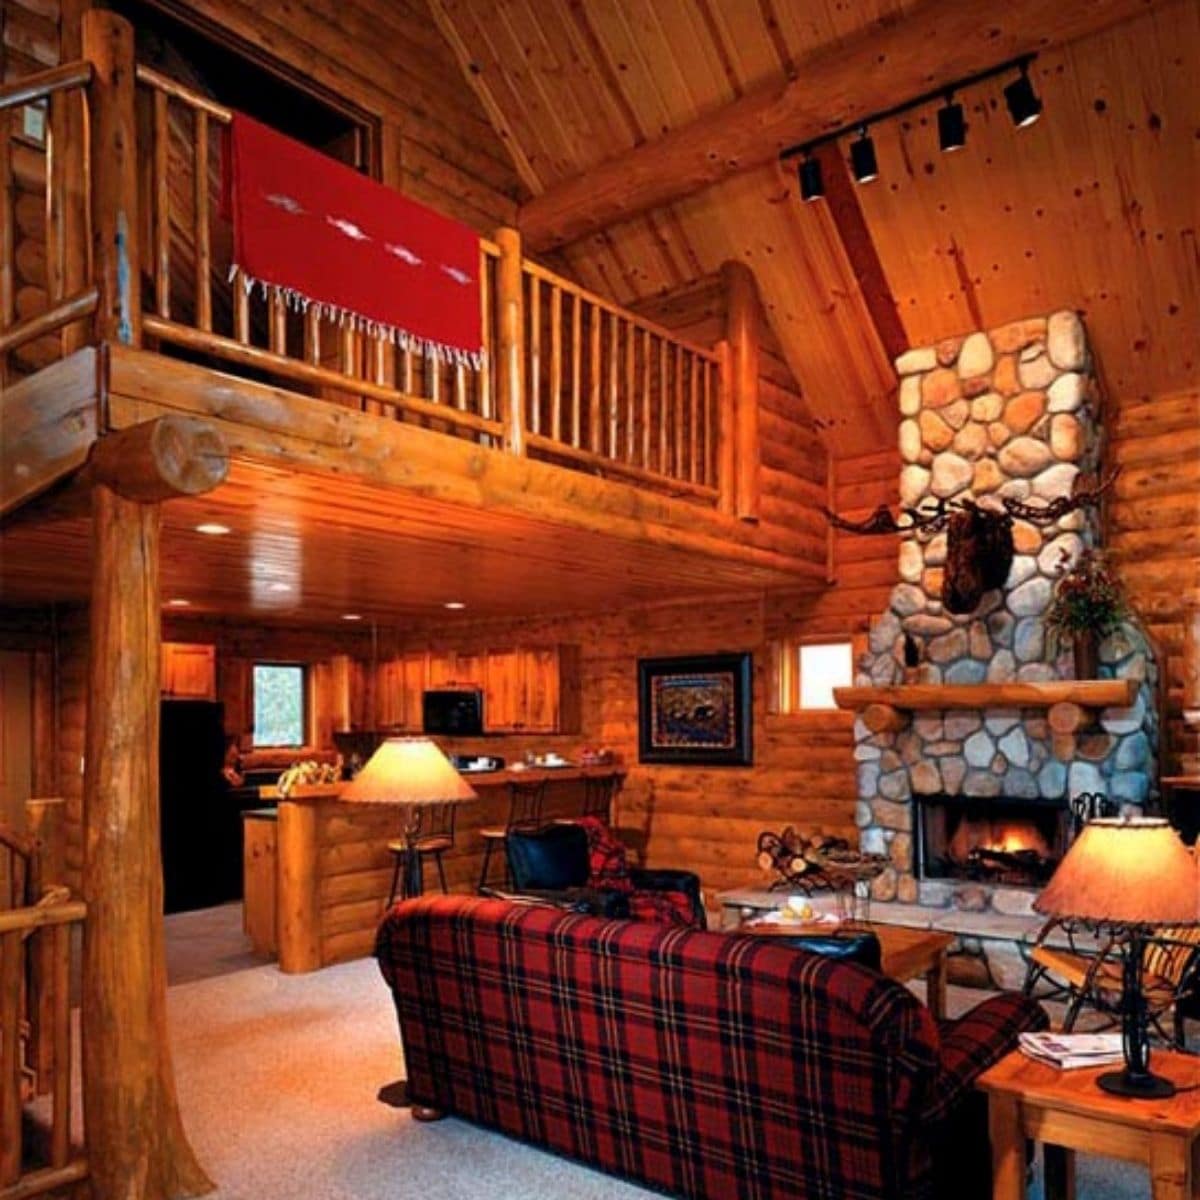 red plaid sofa in foreground of room with stone fireplace in back and loft above to right